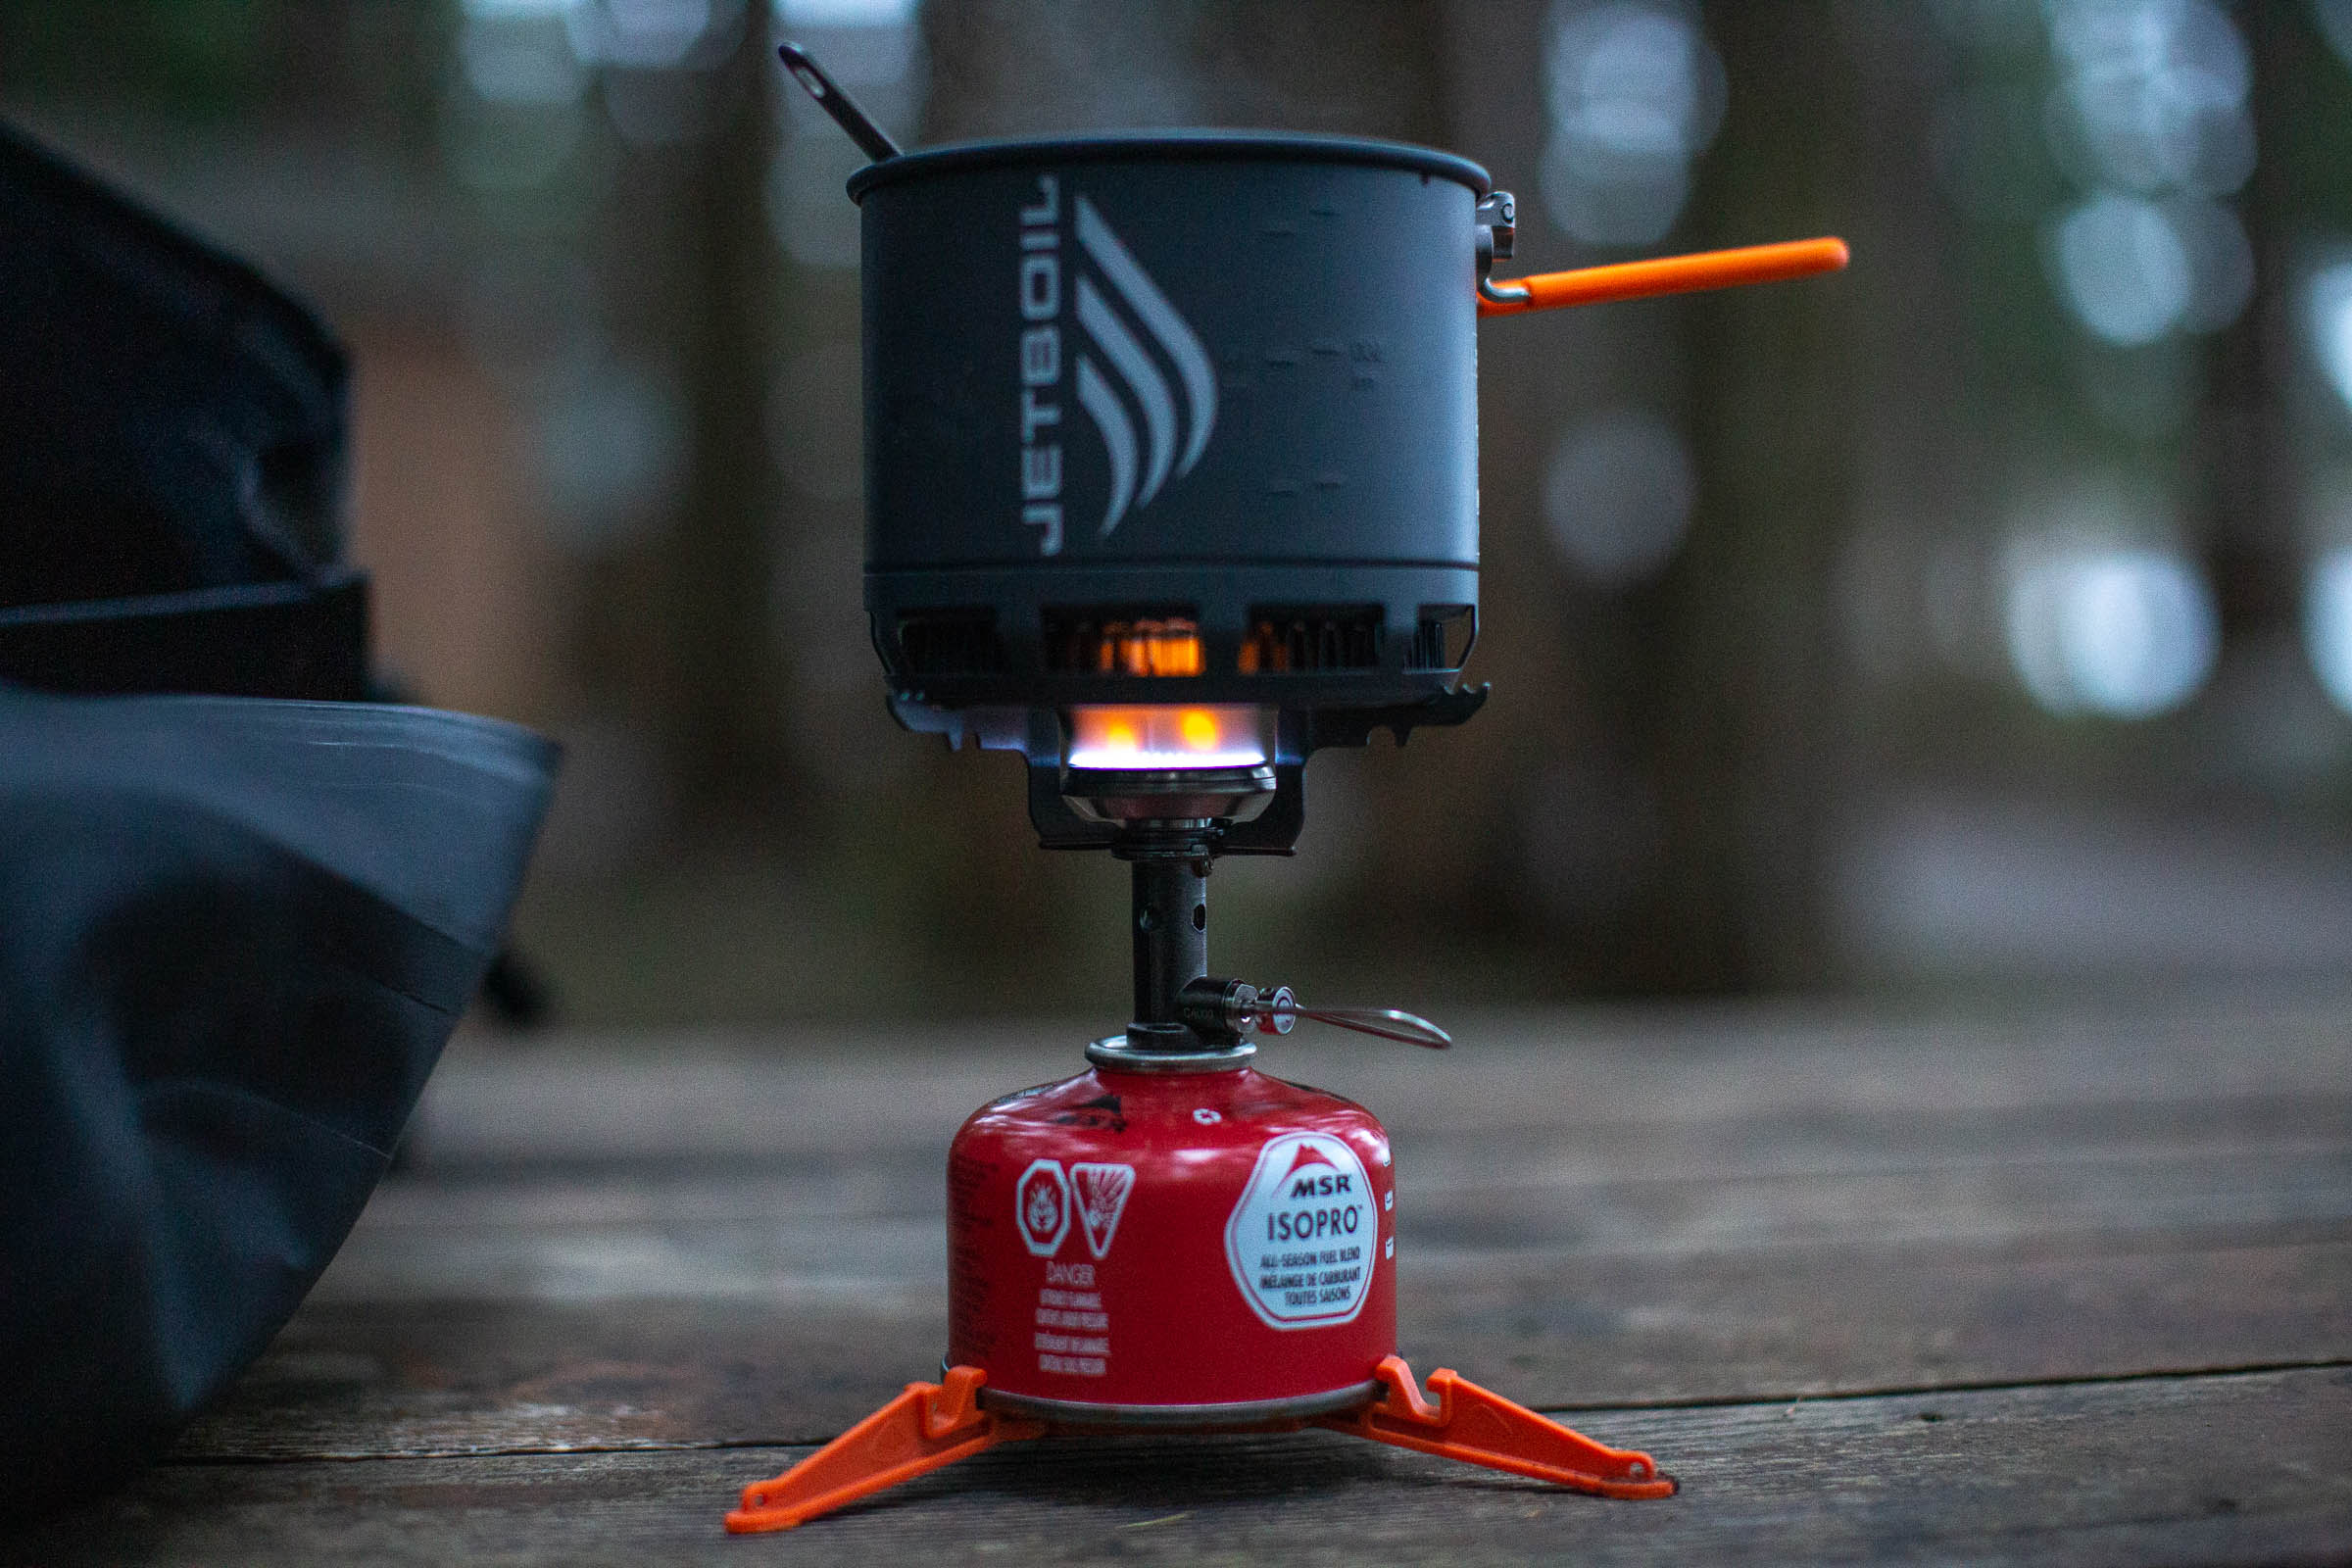 Jetboil Stash Review: The Complete Kit - BIKEPACKING.com